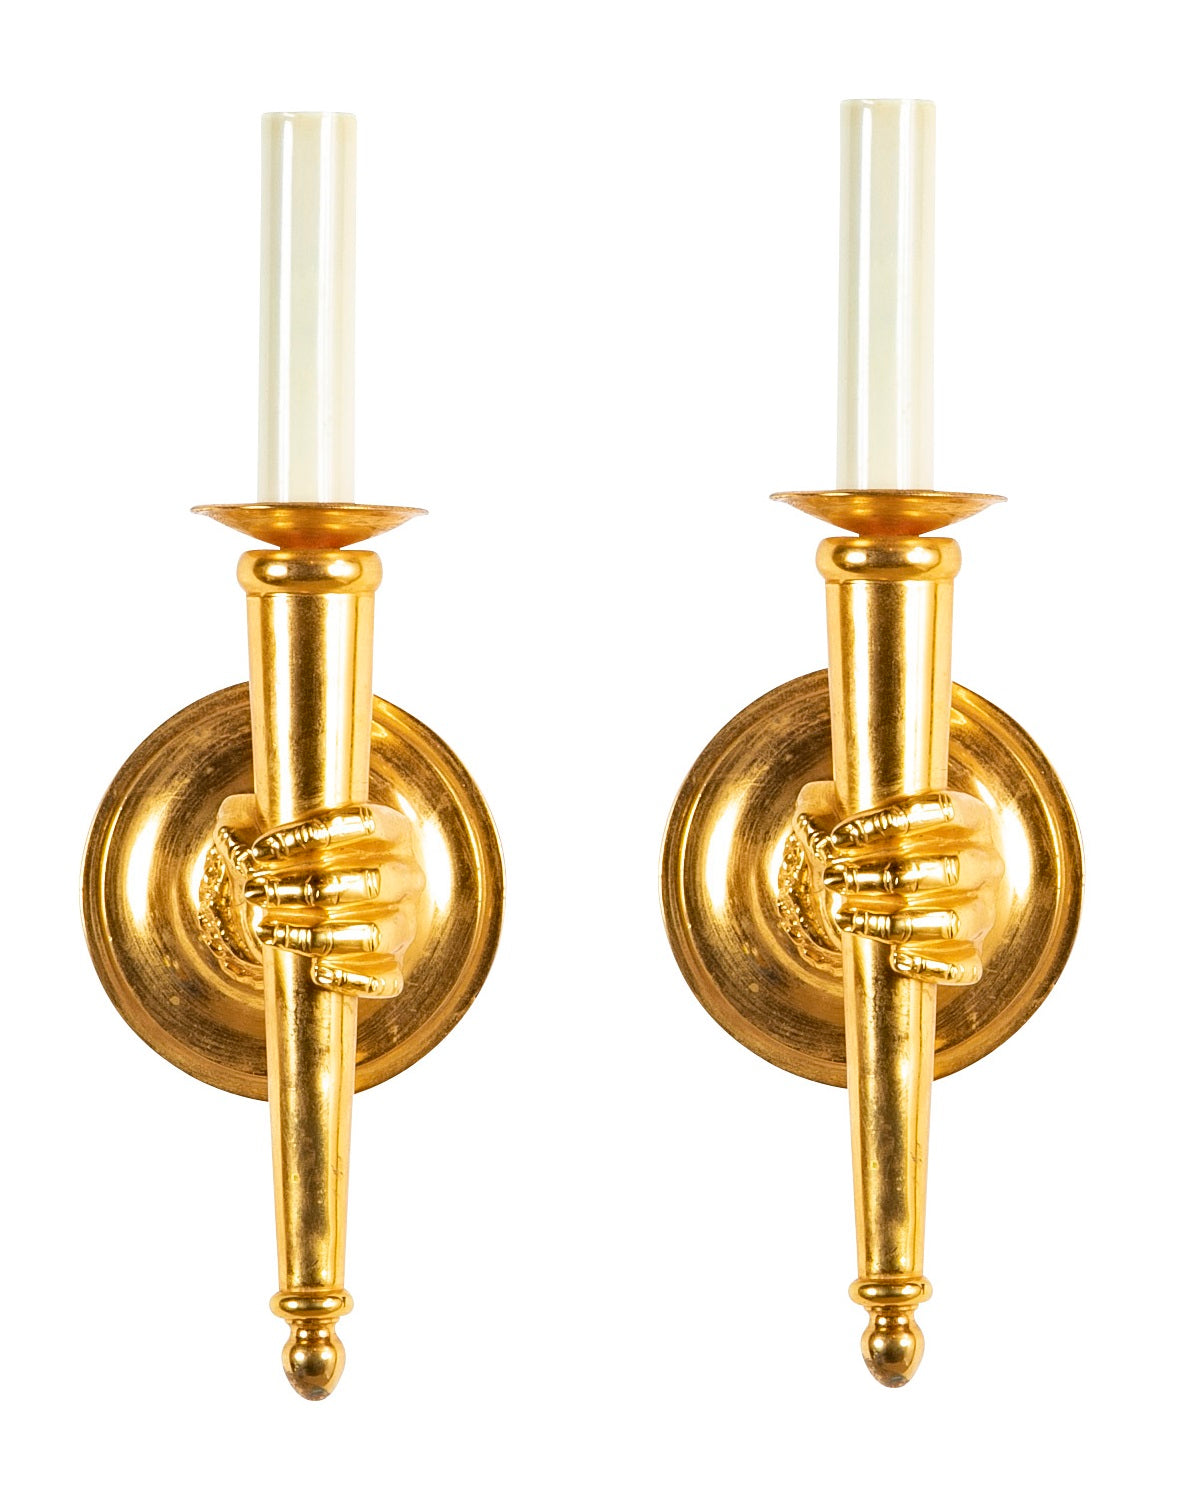 A Pair of Gilt Bronze Sconces in the Style of Andre Arbus